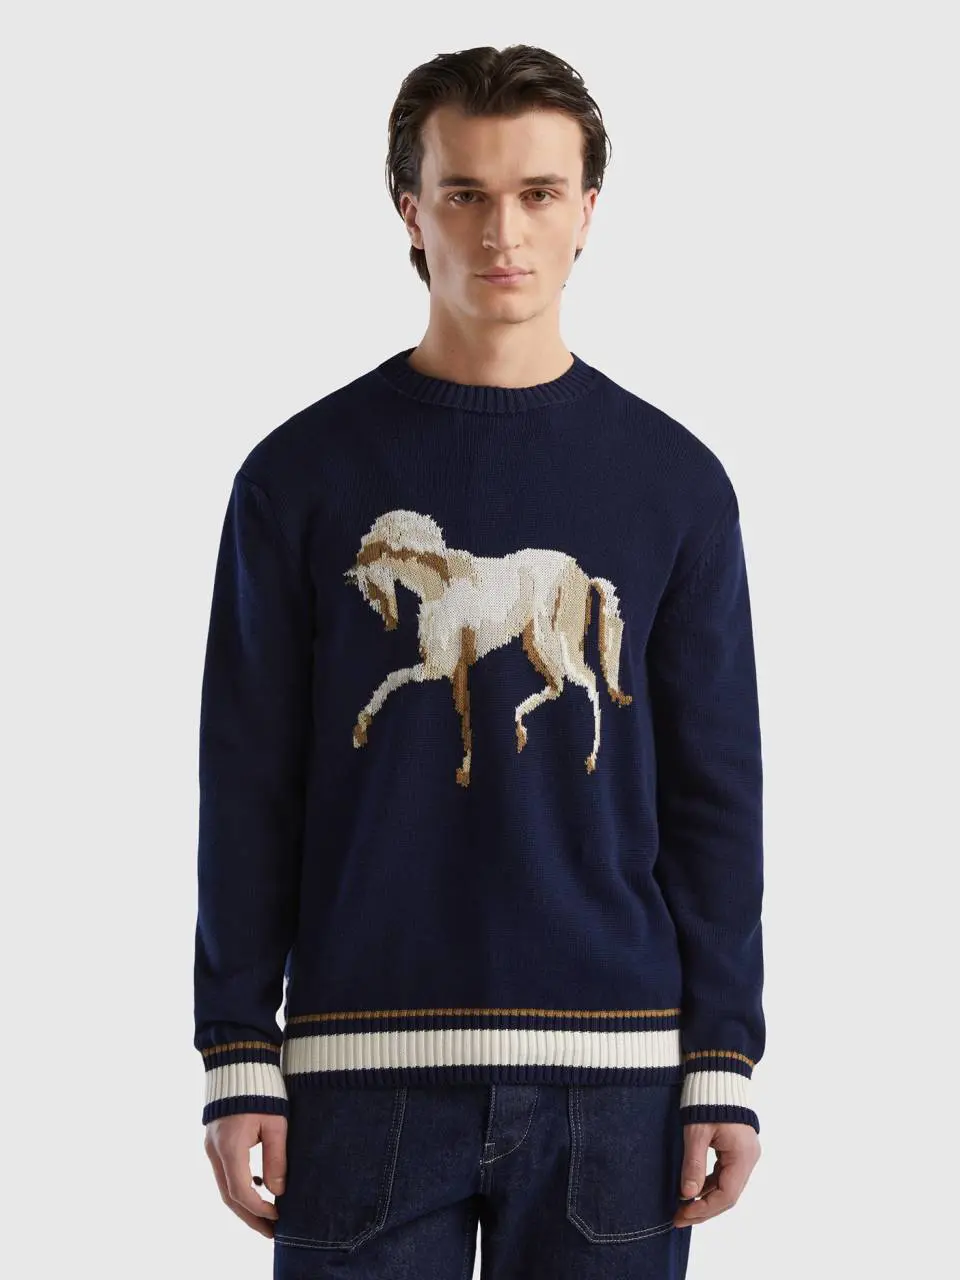 Benetton sweater with horse inlay. 1